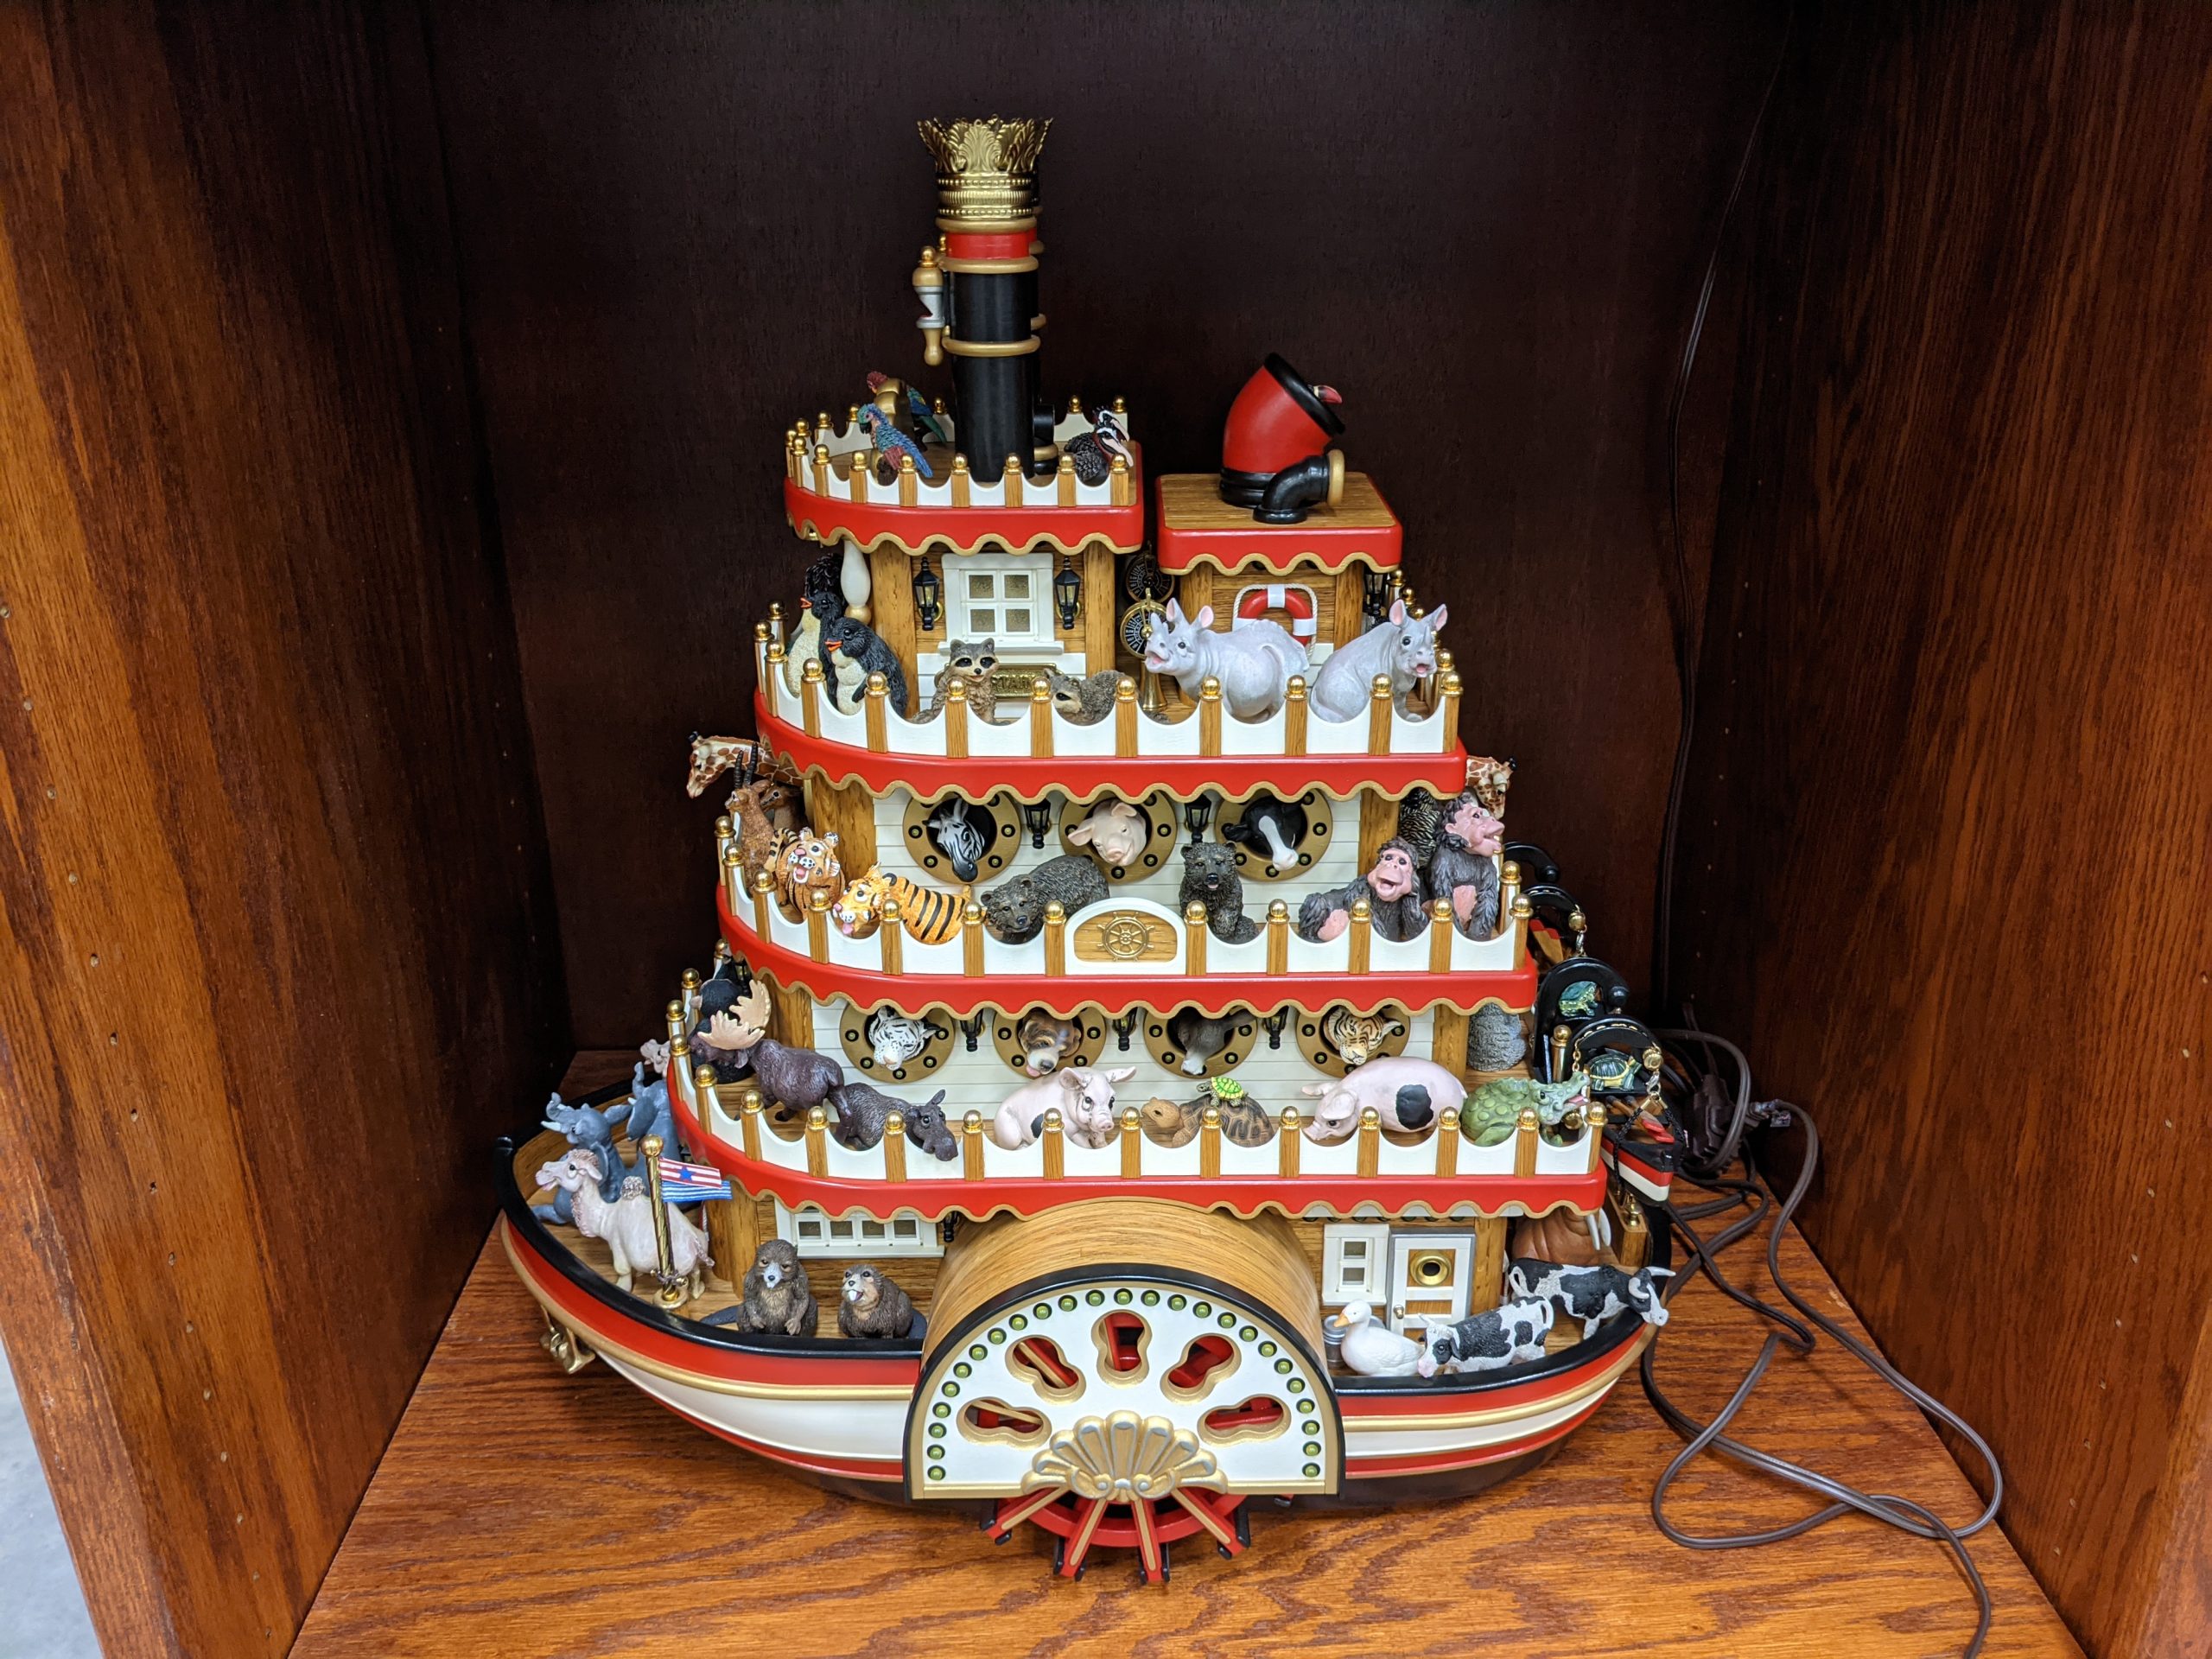 Don's "Steam Boat" music box depicts Noah's Ark.